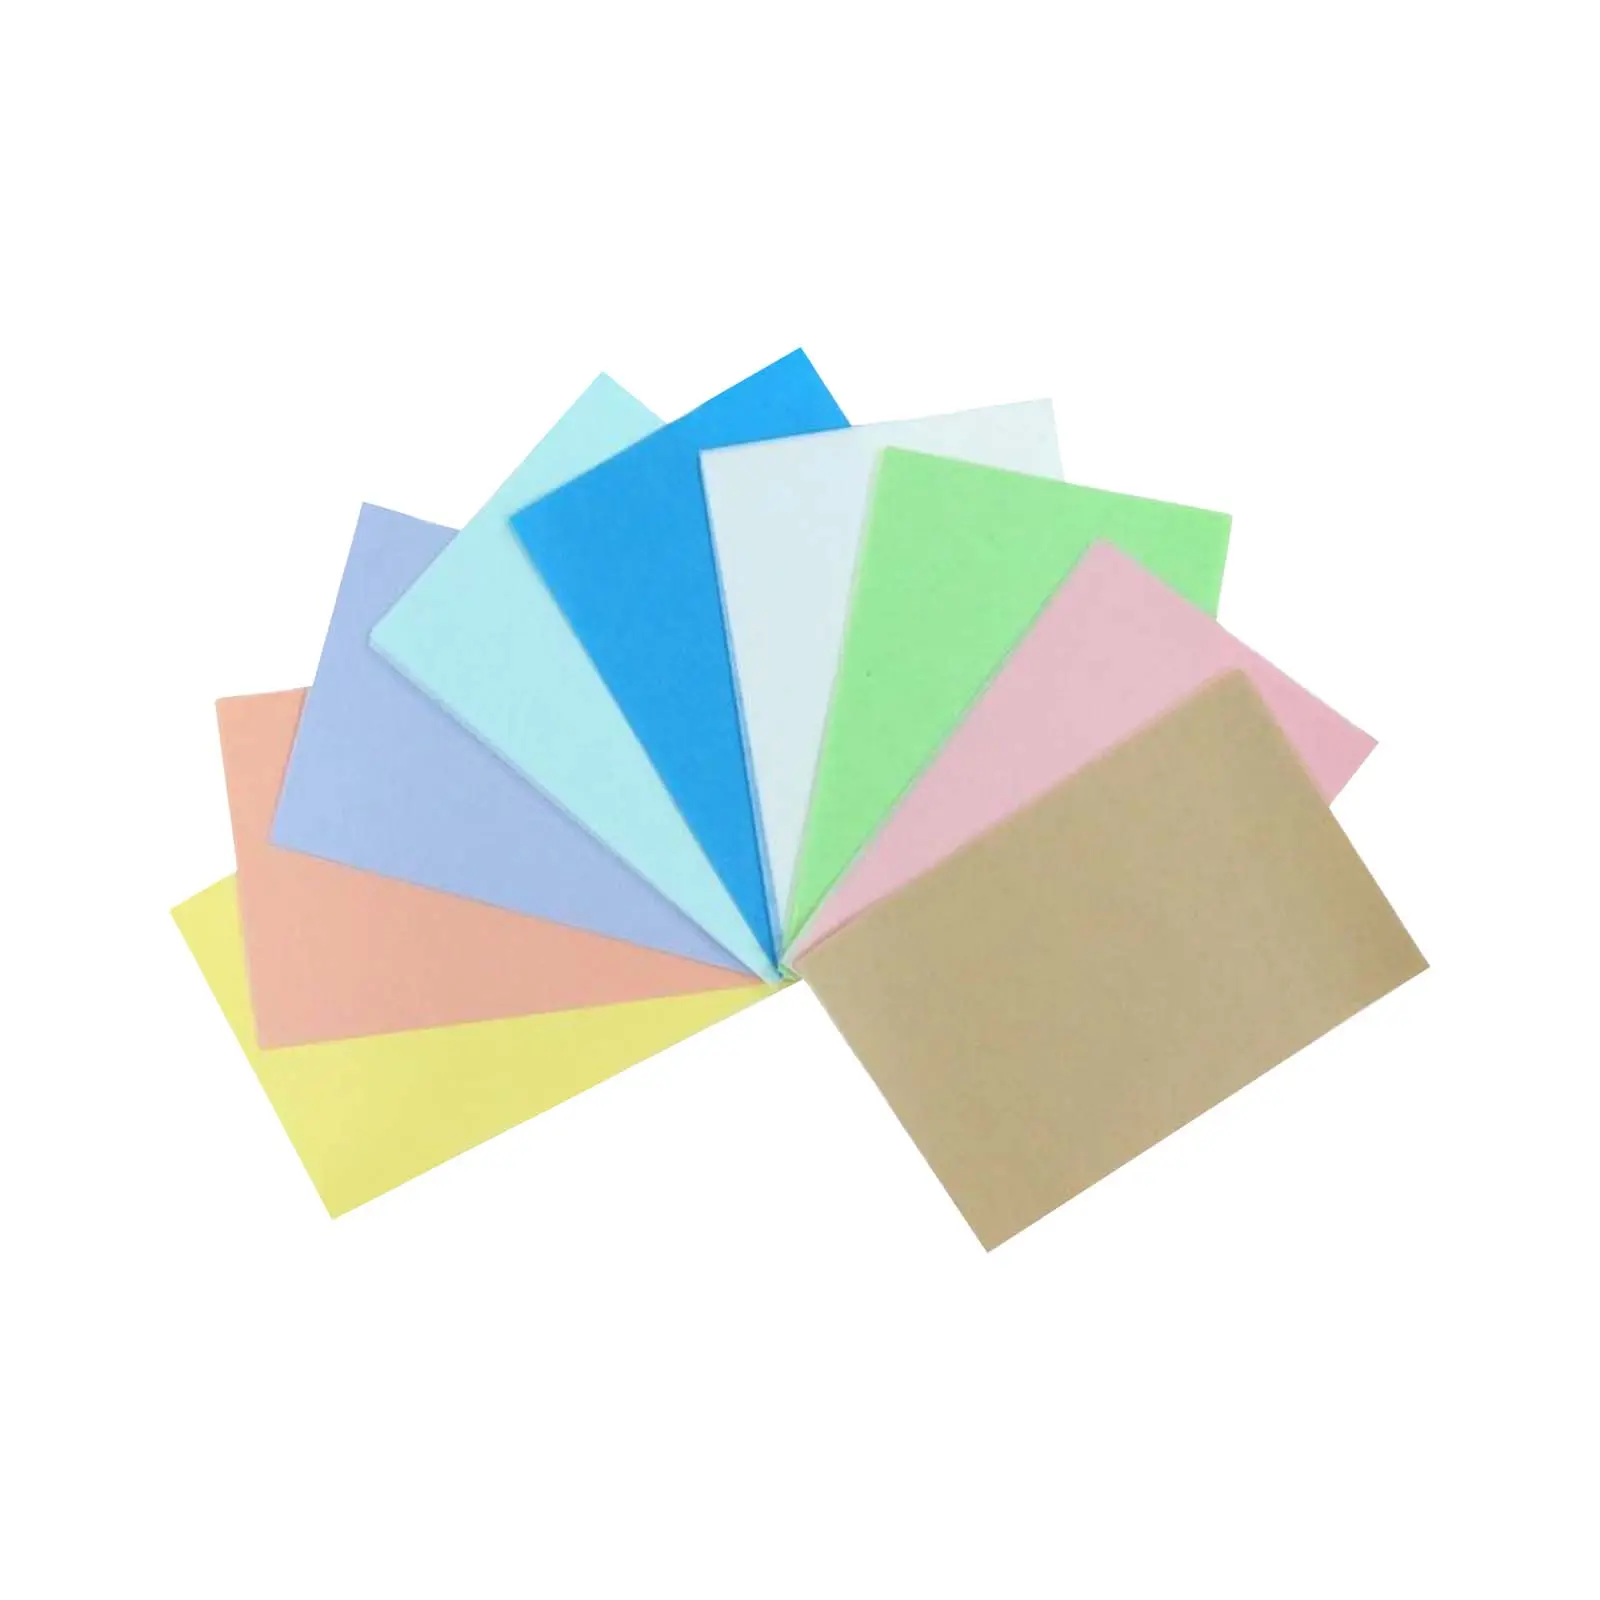 Factory private OEM/ODM customize facial oil blotting paper for home/office/travel use